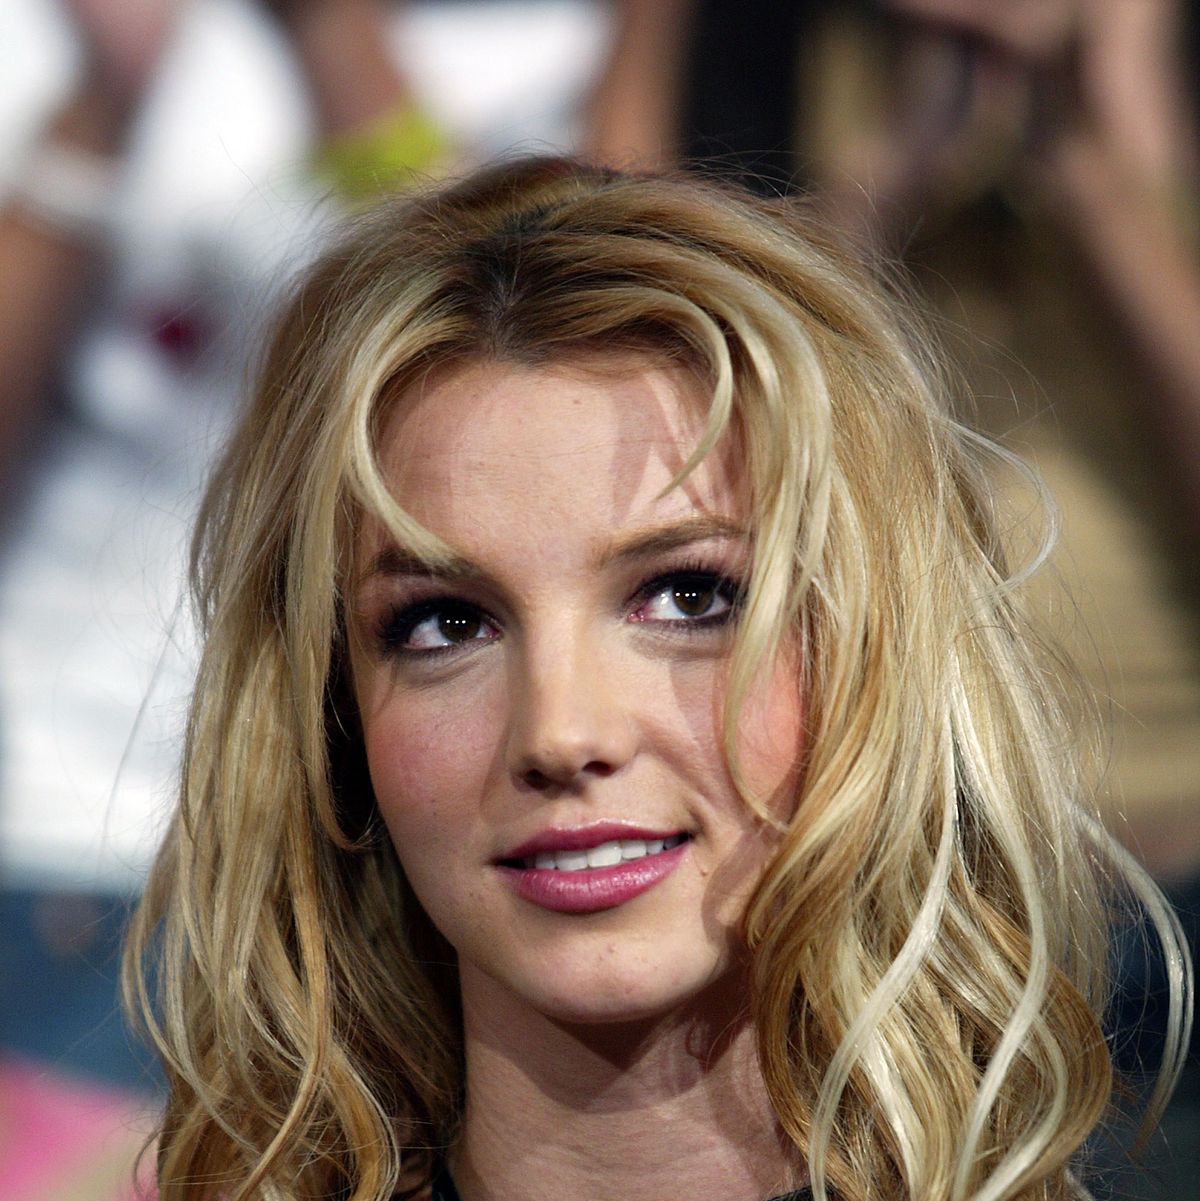 Britney Spears Addresses Conservatorship Publicly for the First Time